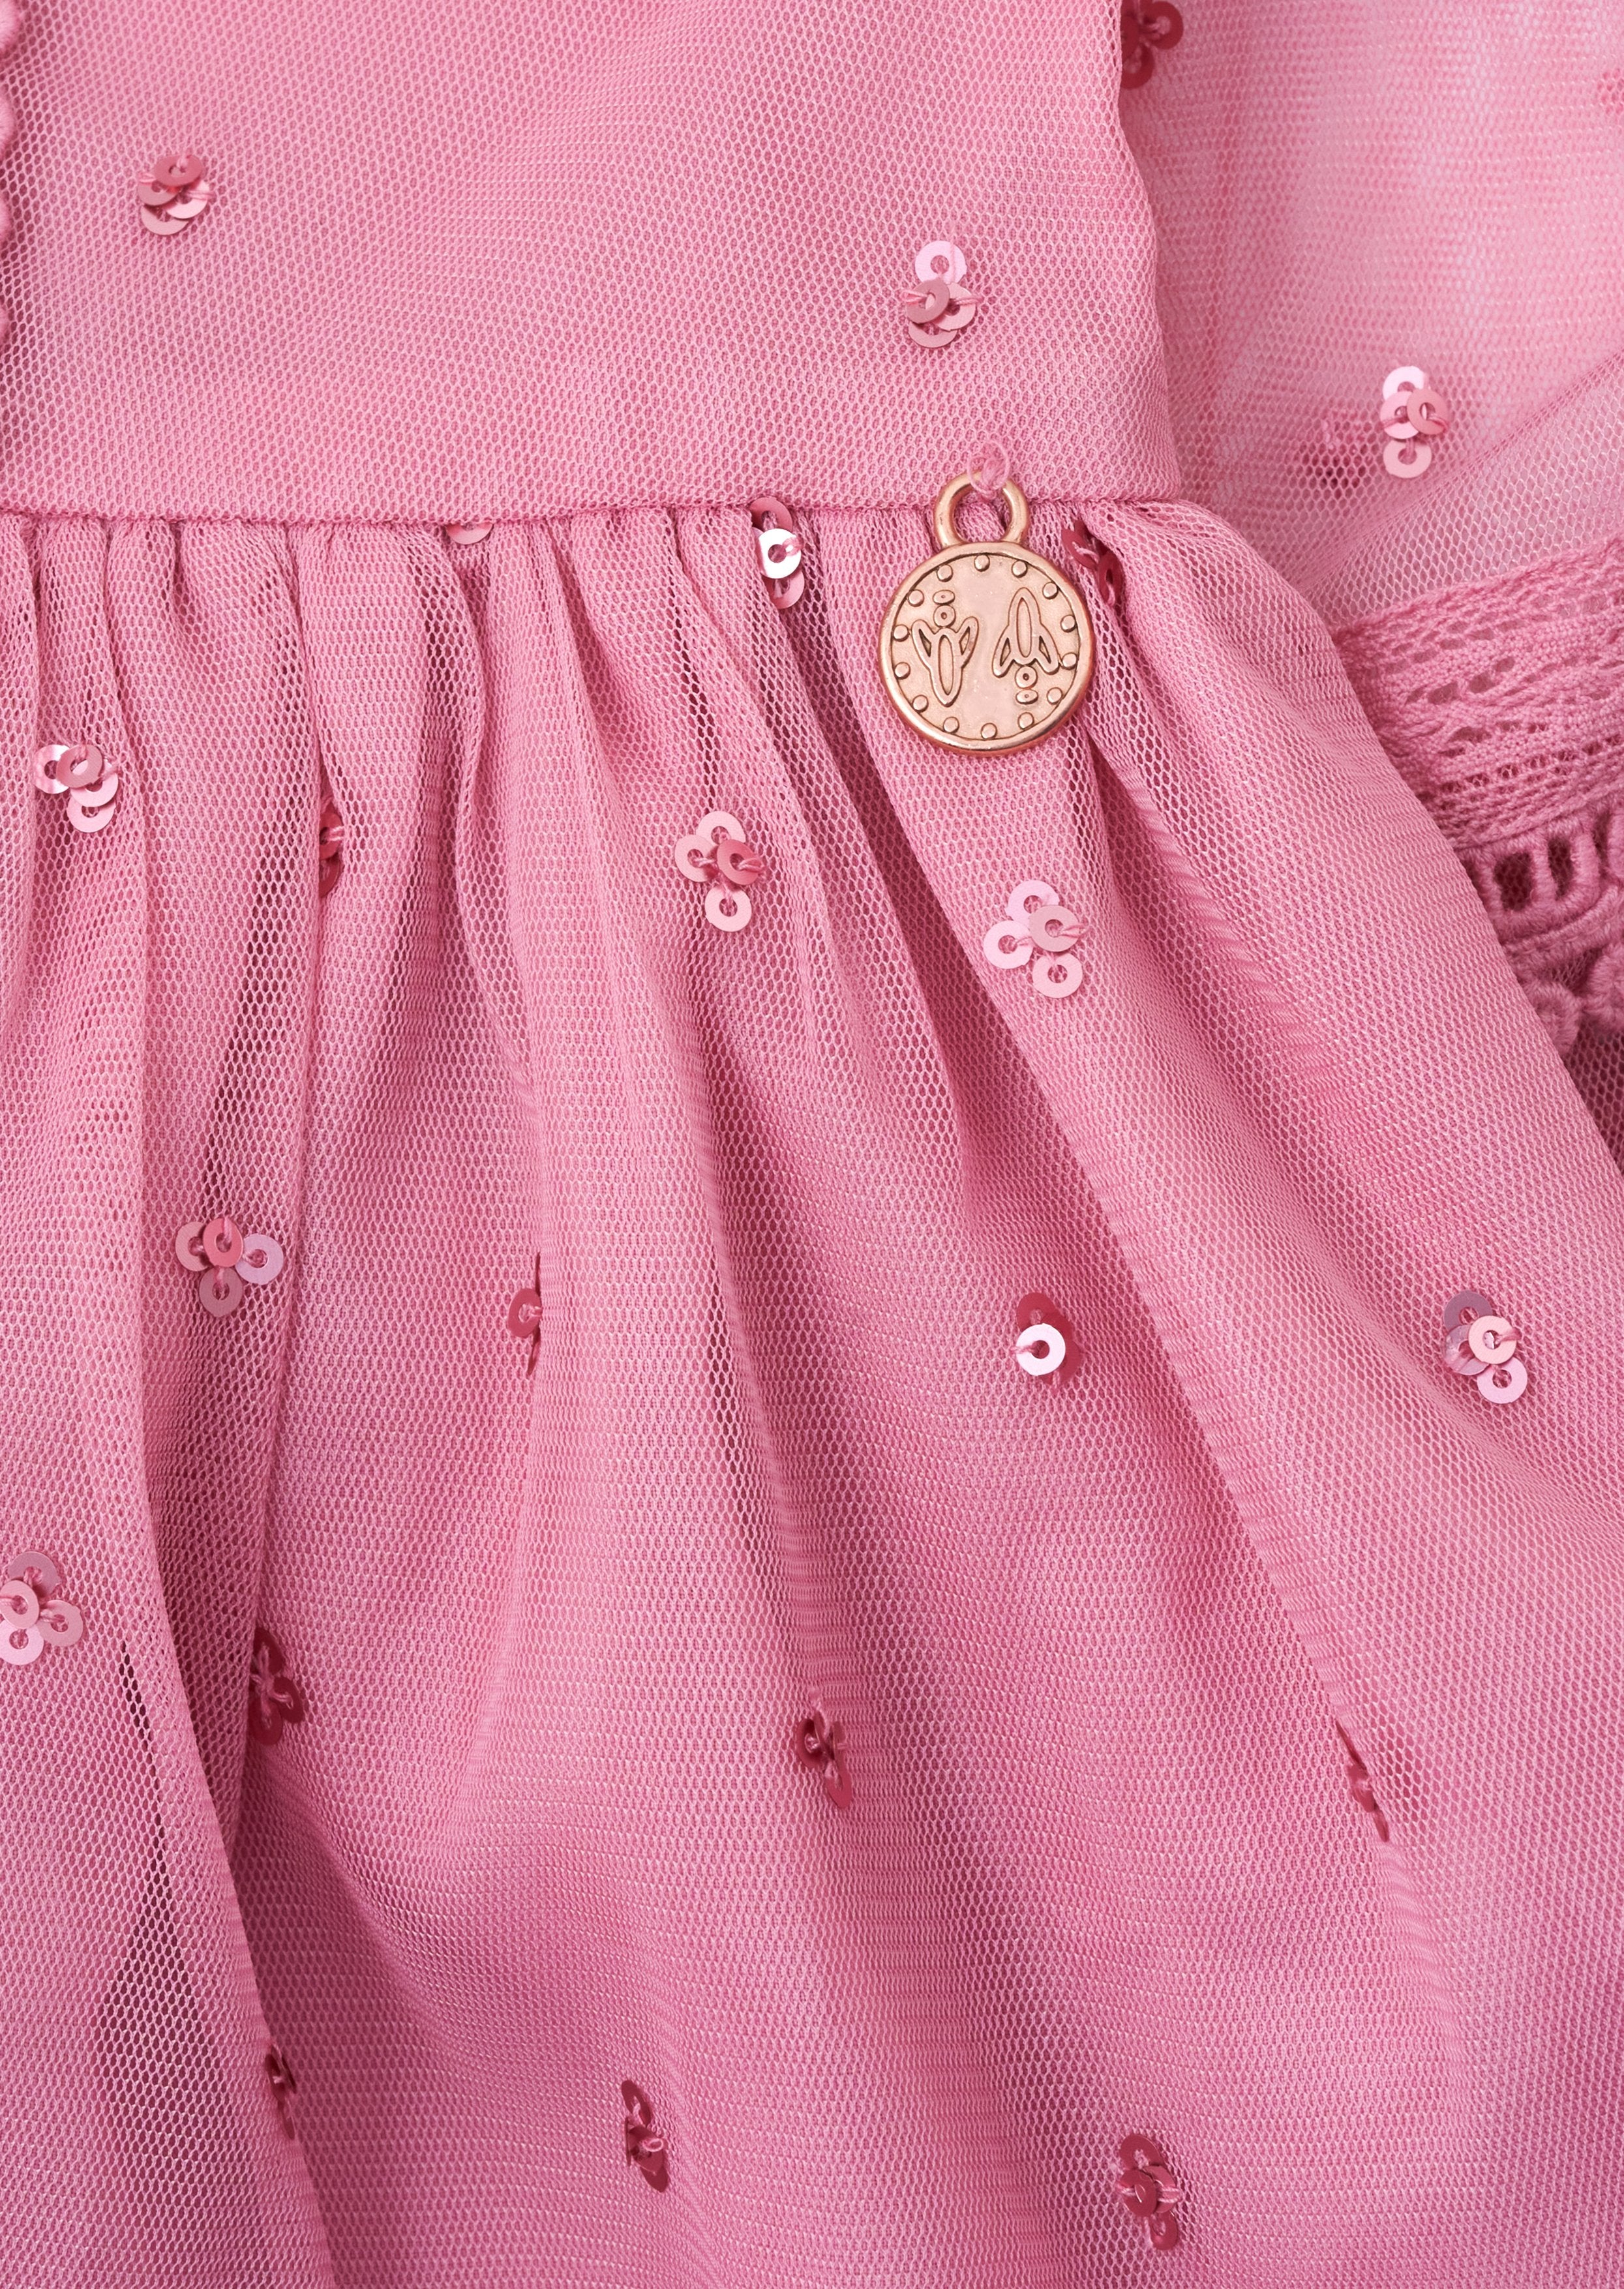 Girls Embroidered and Sequin Embellished Pink Dress